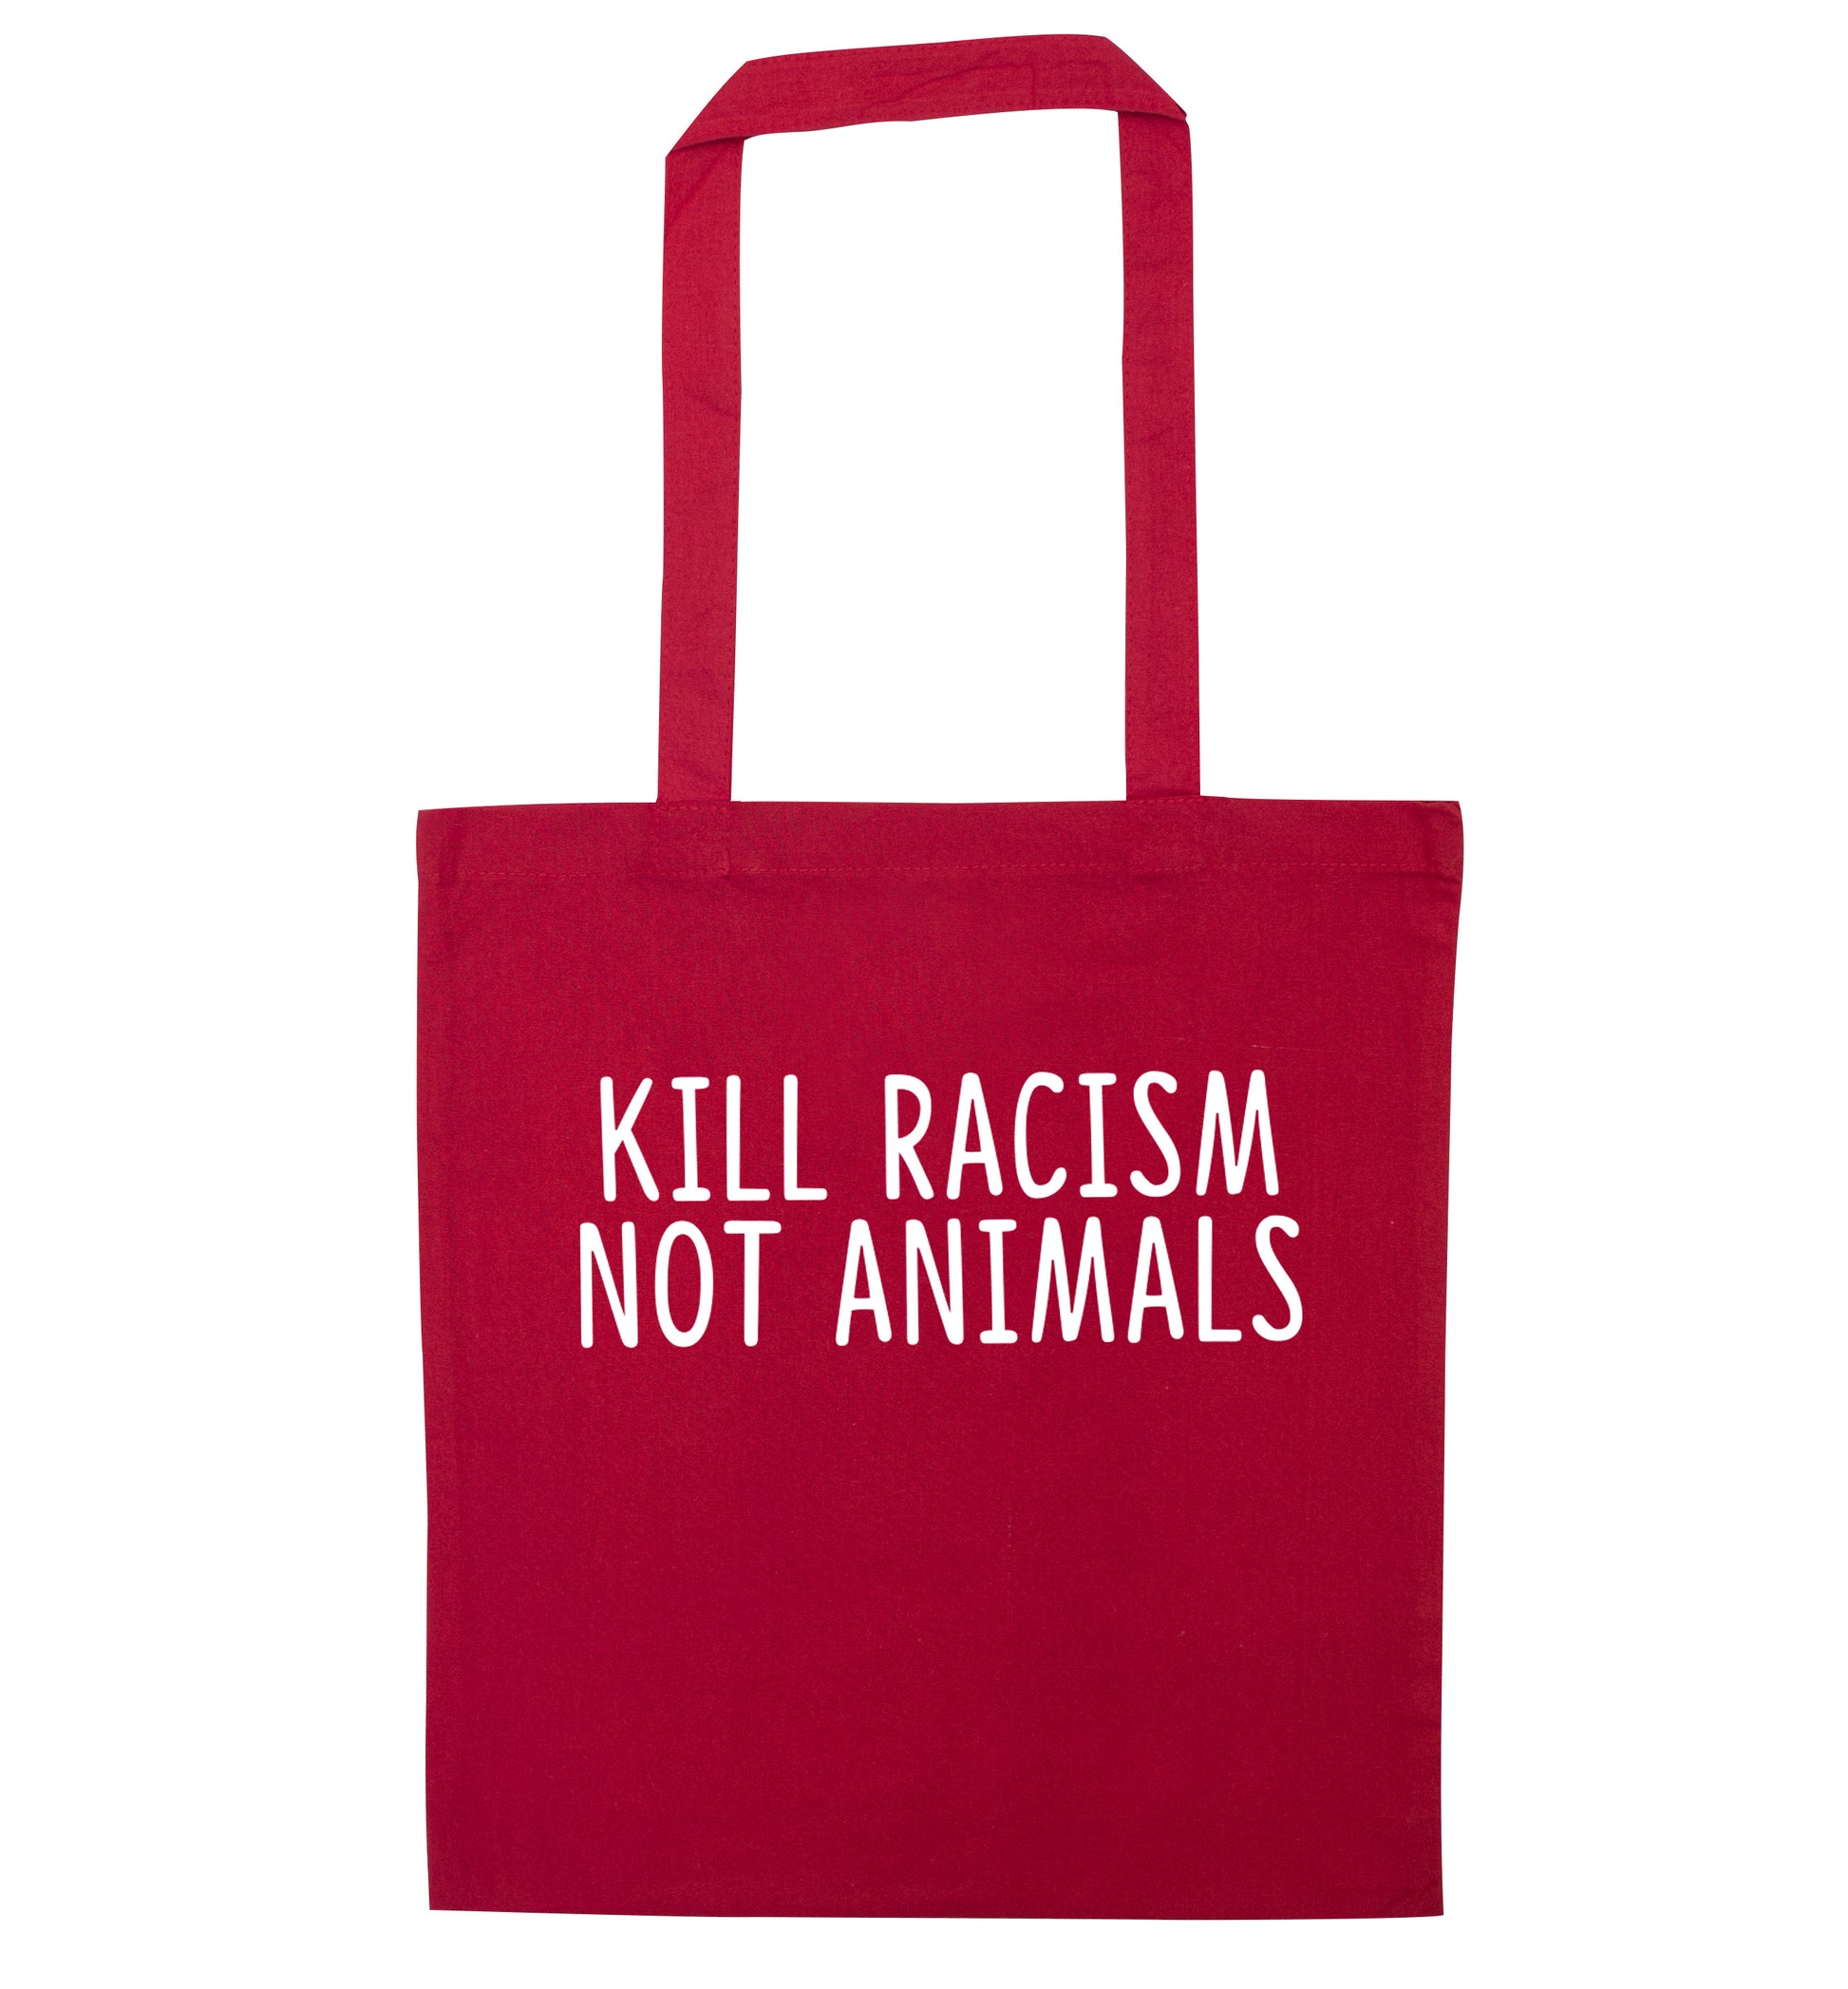 Kill Racism Not Animals red tote bag